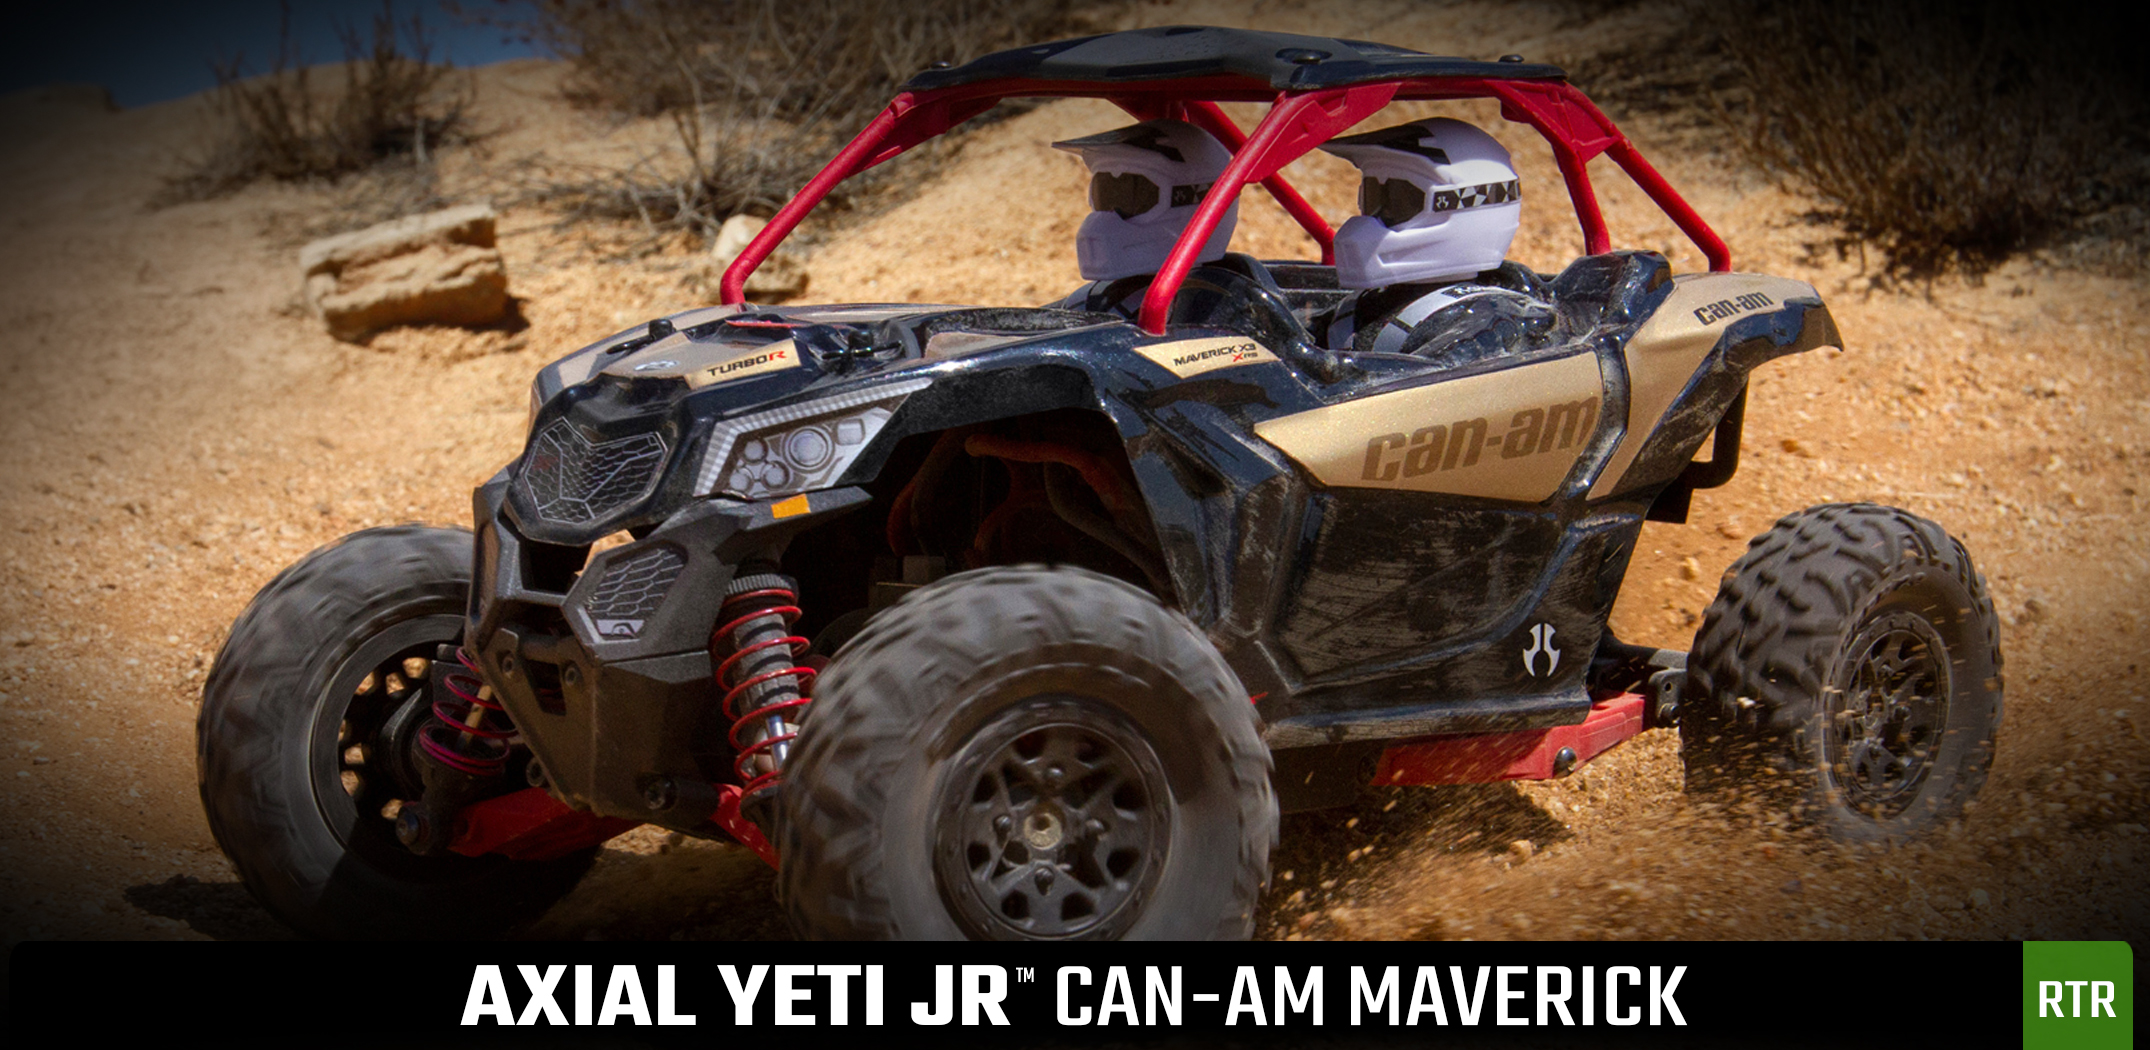 Axial Yeti Jr. Can-Am Maverick X3 1/18 RTR 4WD Electric Rock Racer Buggy